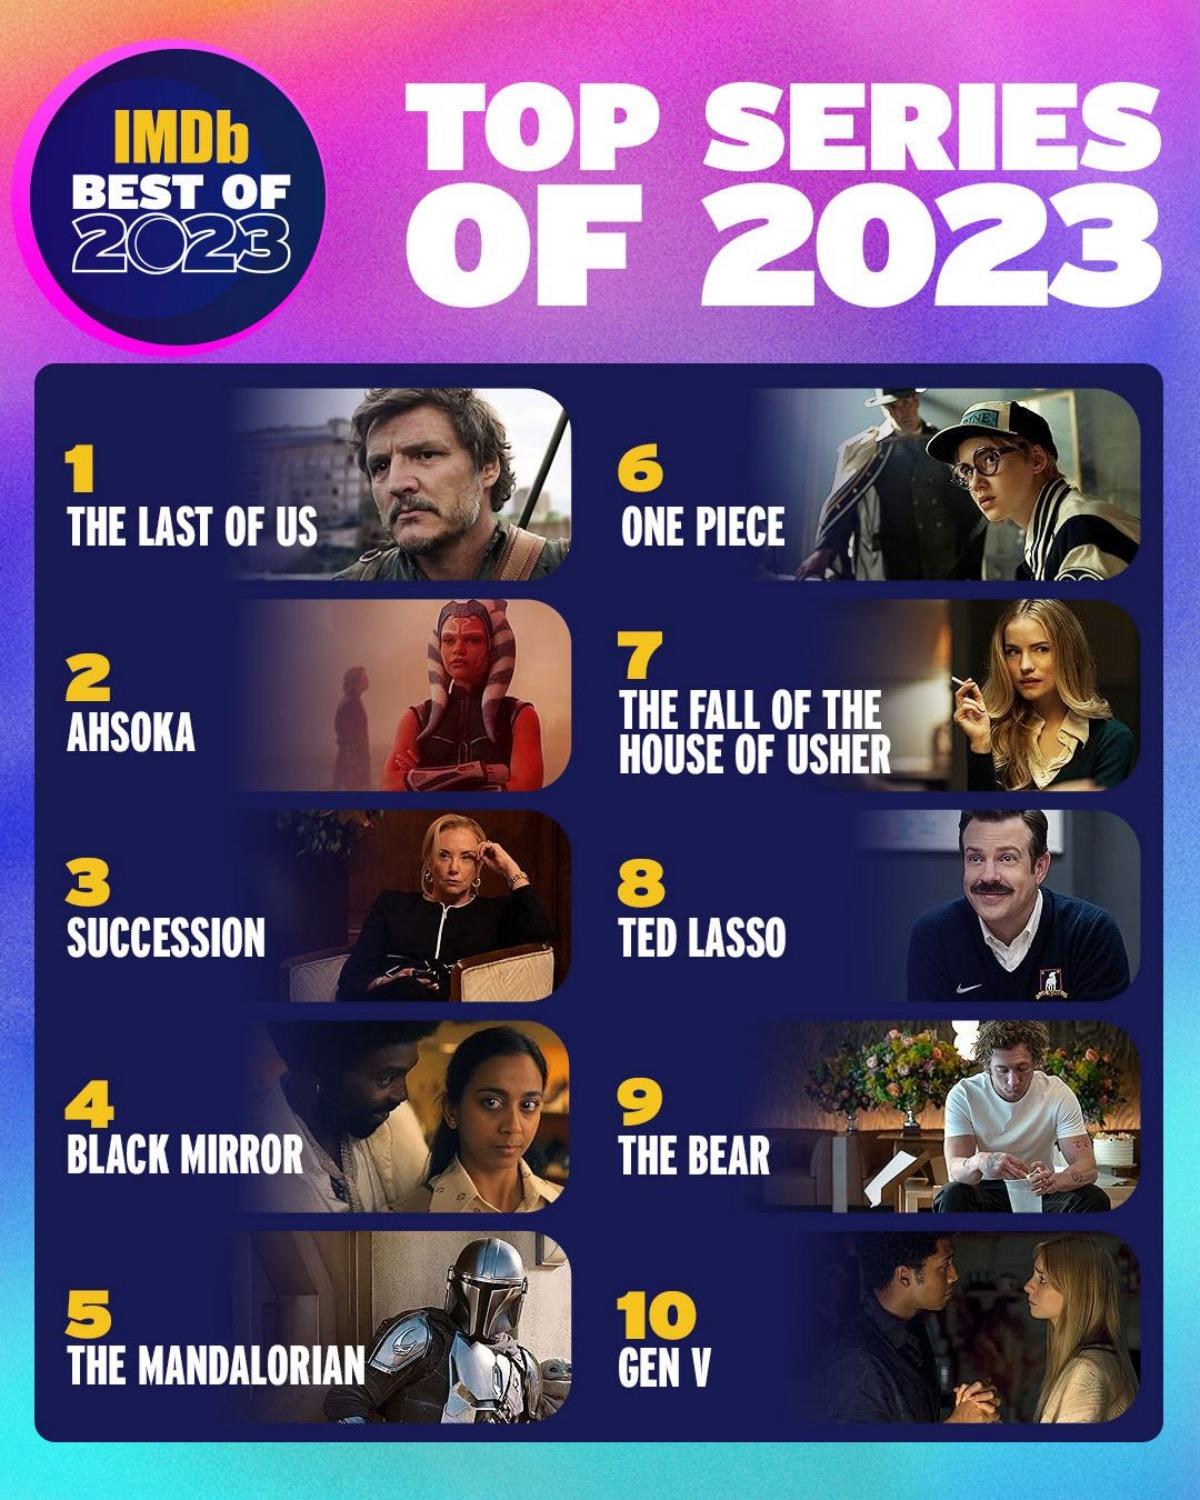 These are the 10 best series of 2023 according to IMDB - Meristation